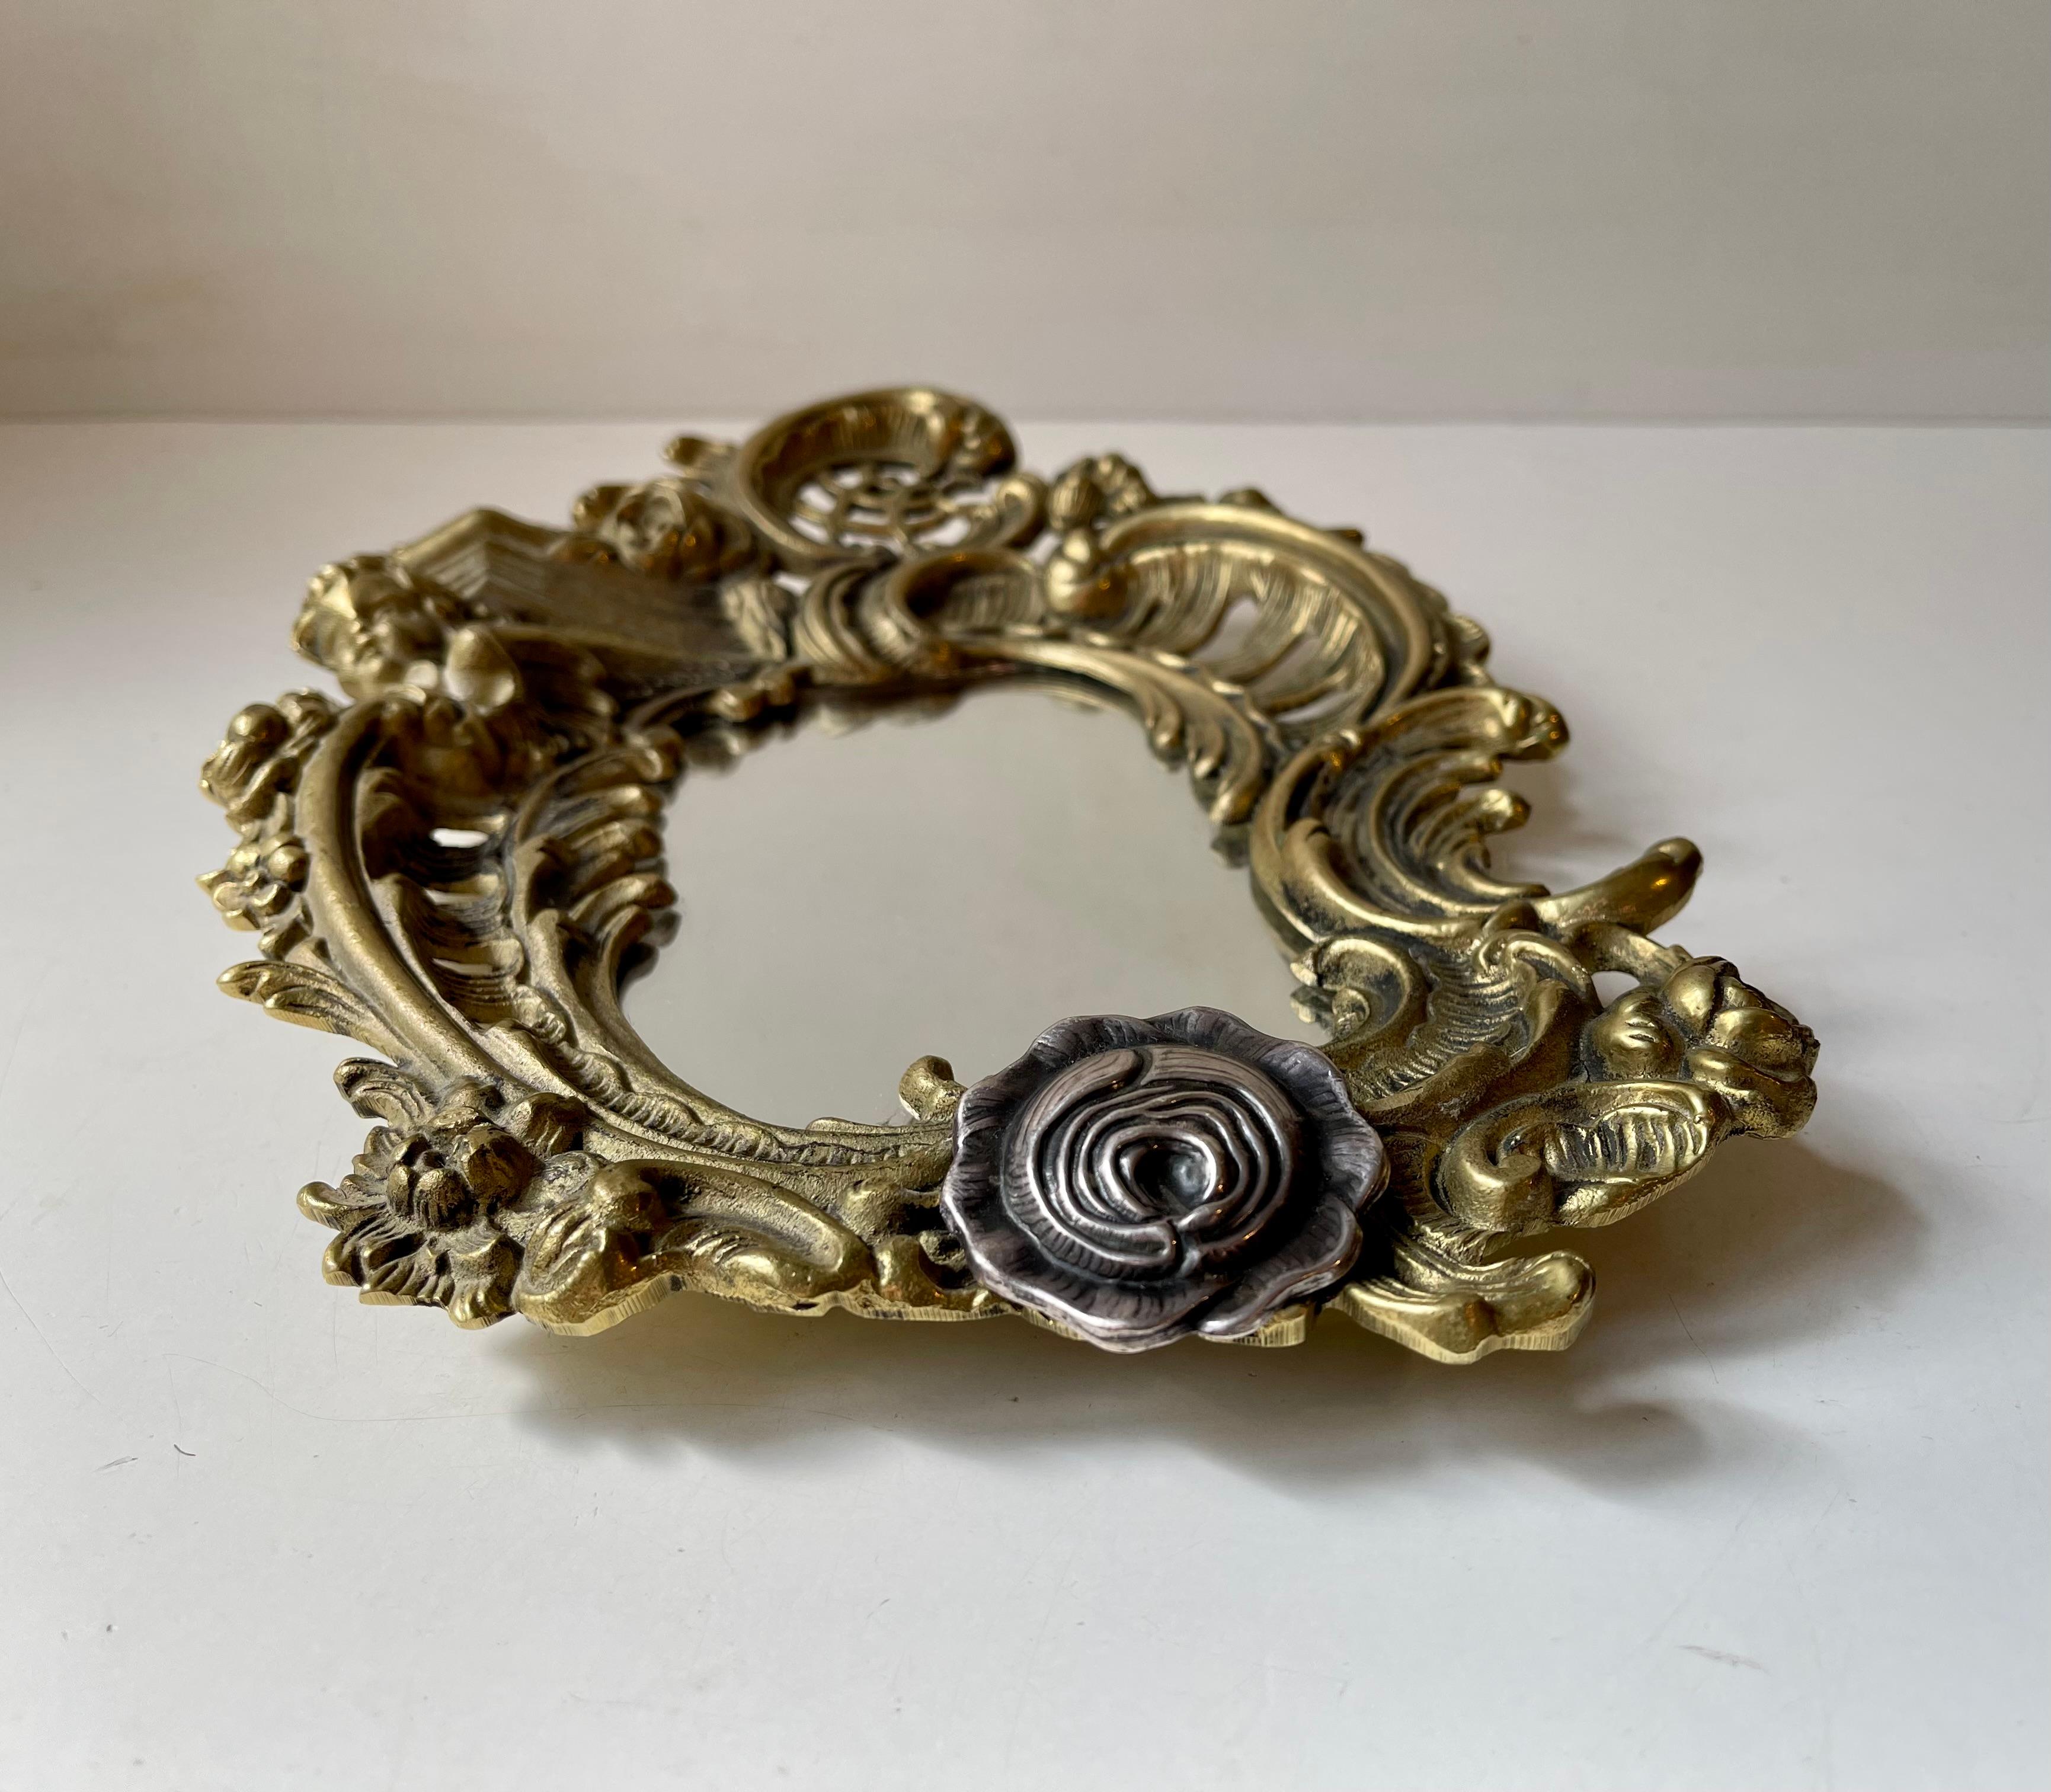 Ornate cast and partially perforated brass mirror decorated with leaves, flowers, an angel and a rosetta in sterling silver. It was made in Italy, probably/possibly bespoke, during the 1970s after neoclassical derived ideals. Measurements: 28x20x5